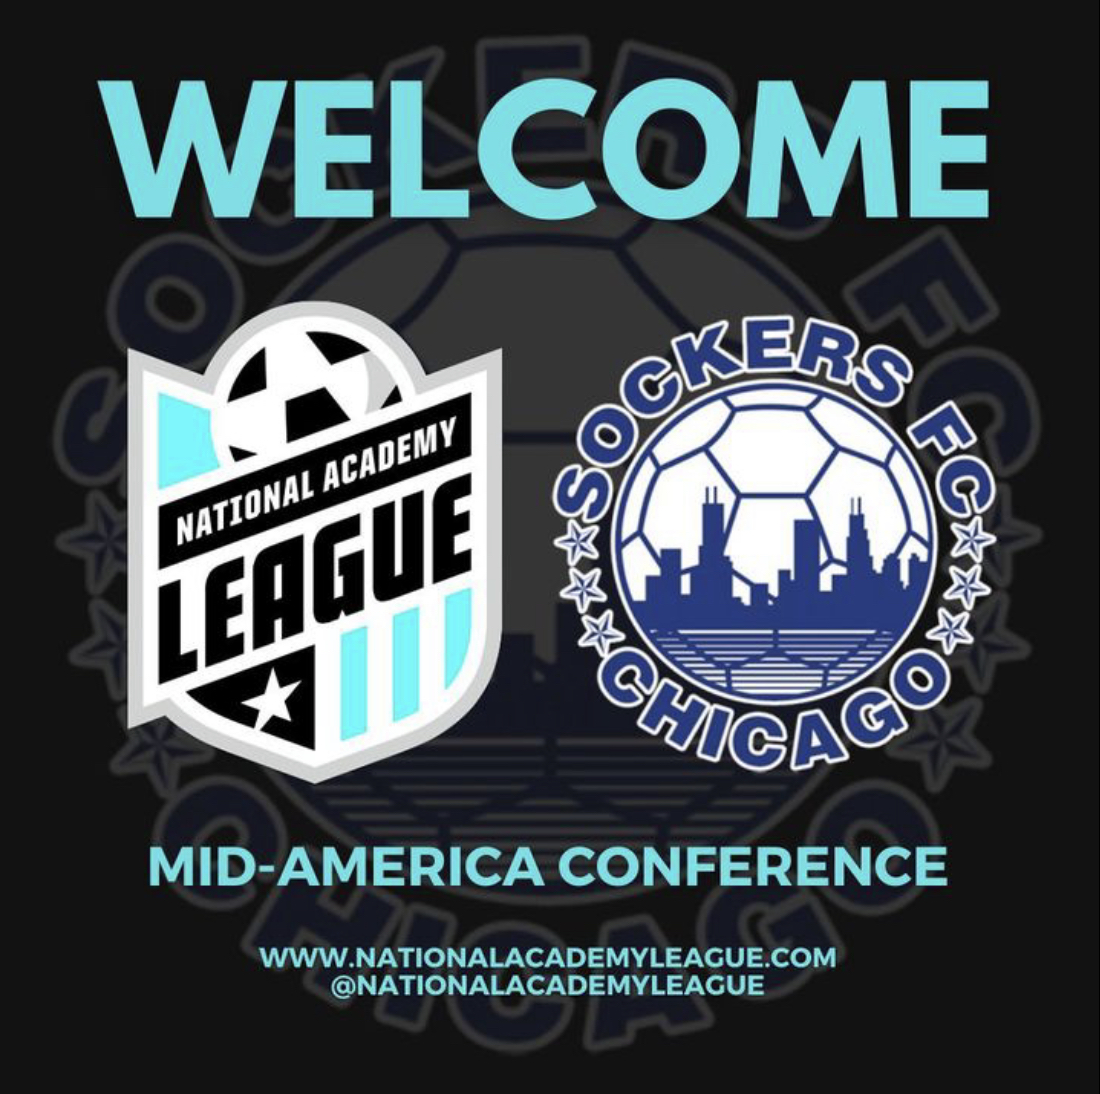 Sockers joins National Academy League